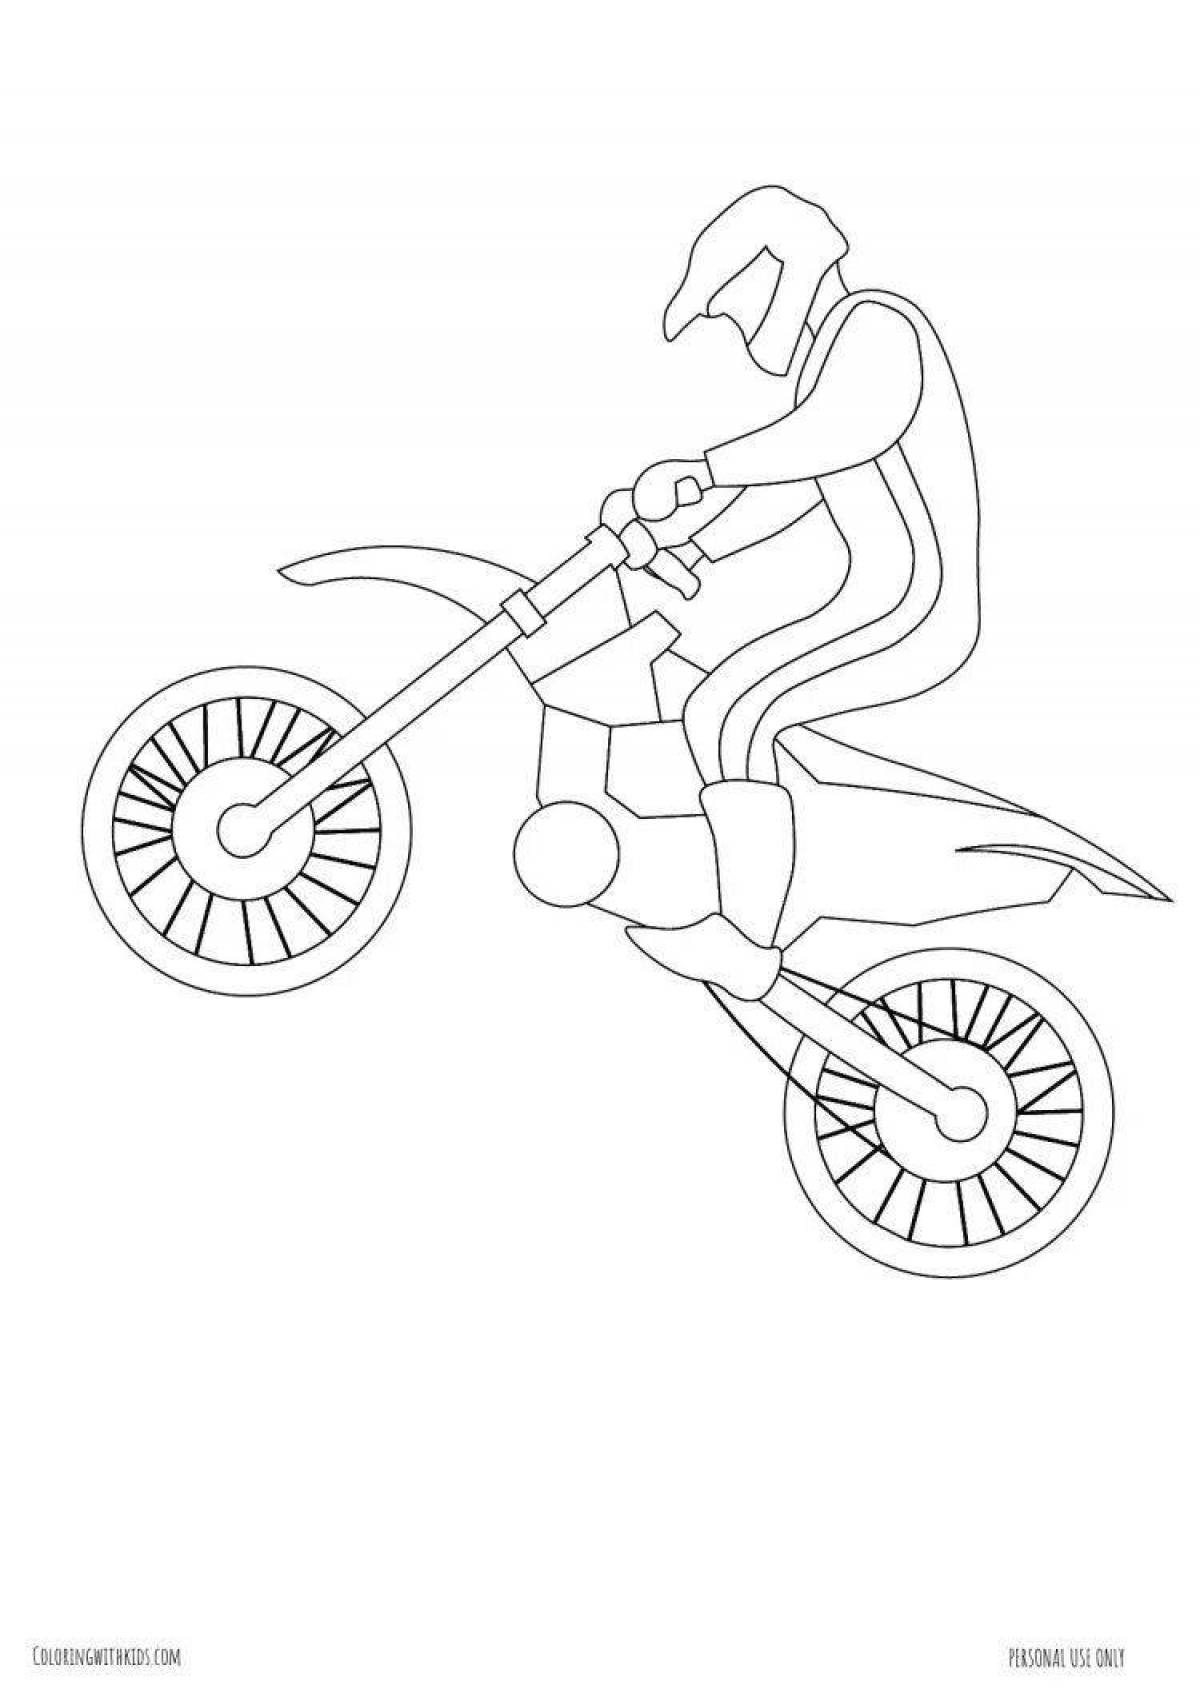 Colorfully drawn pit bike coloring page